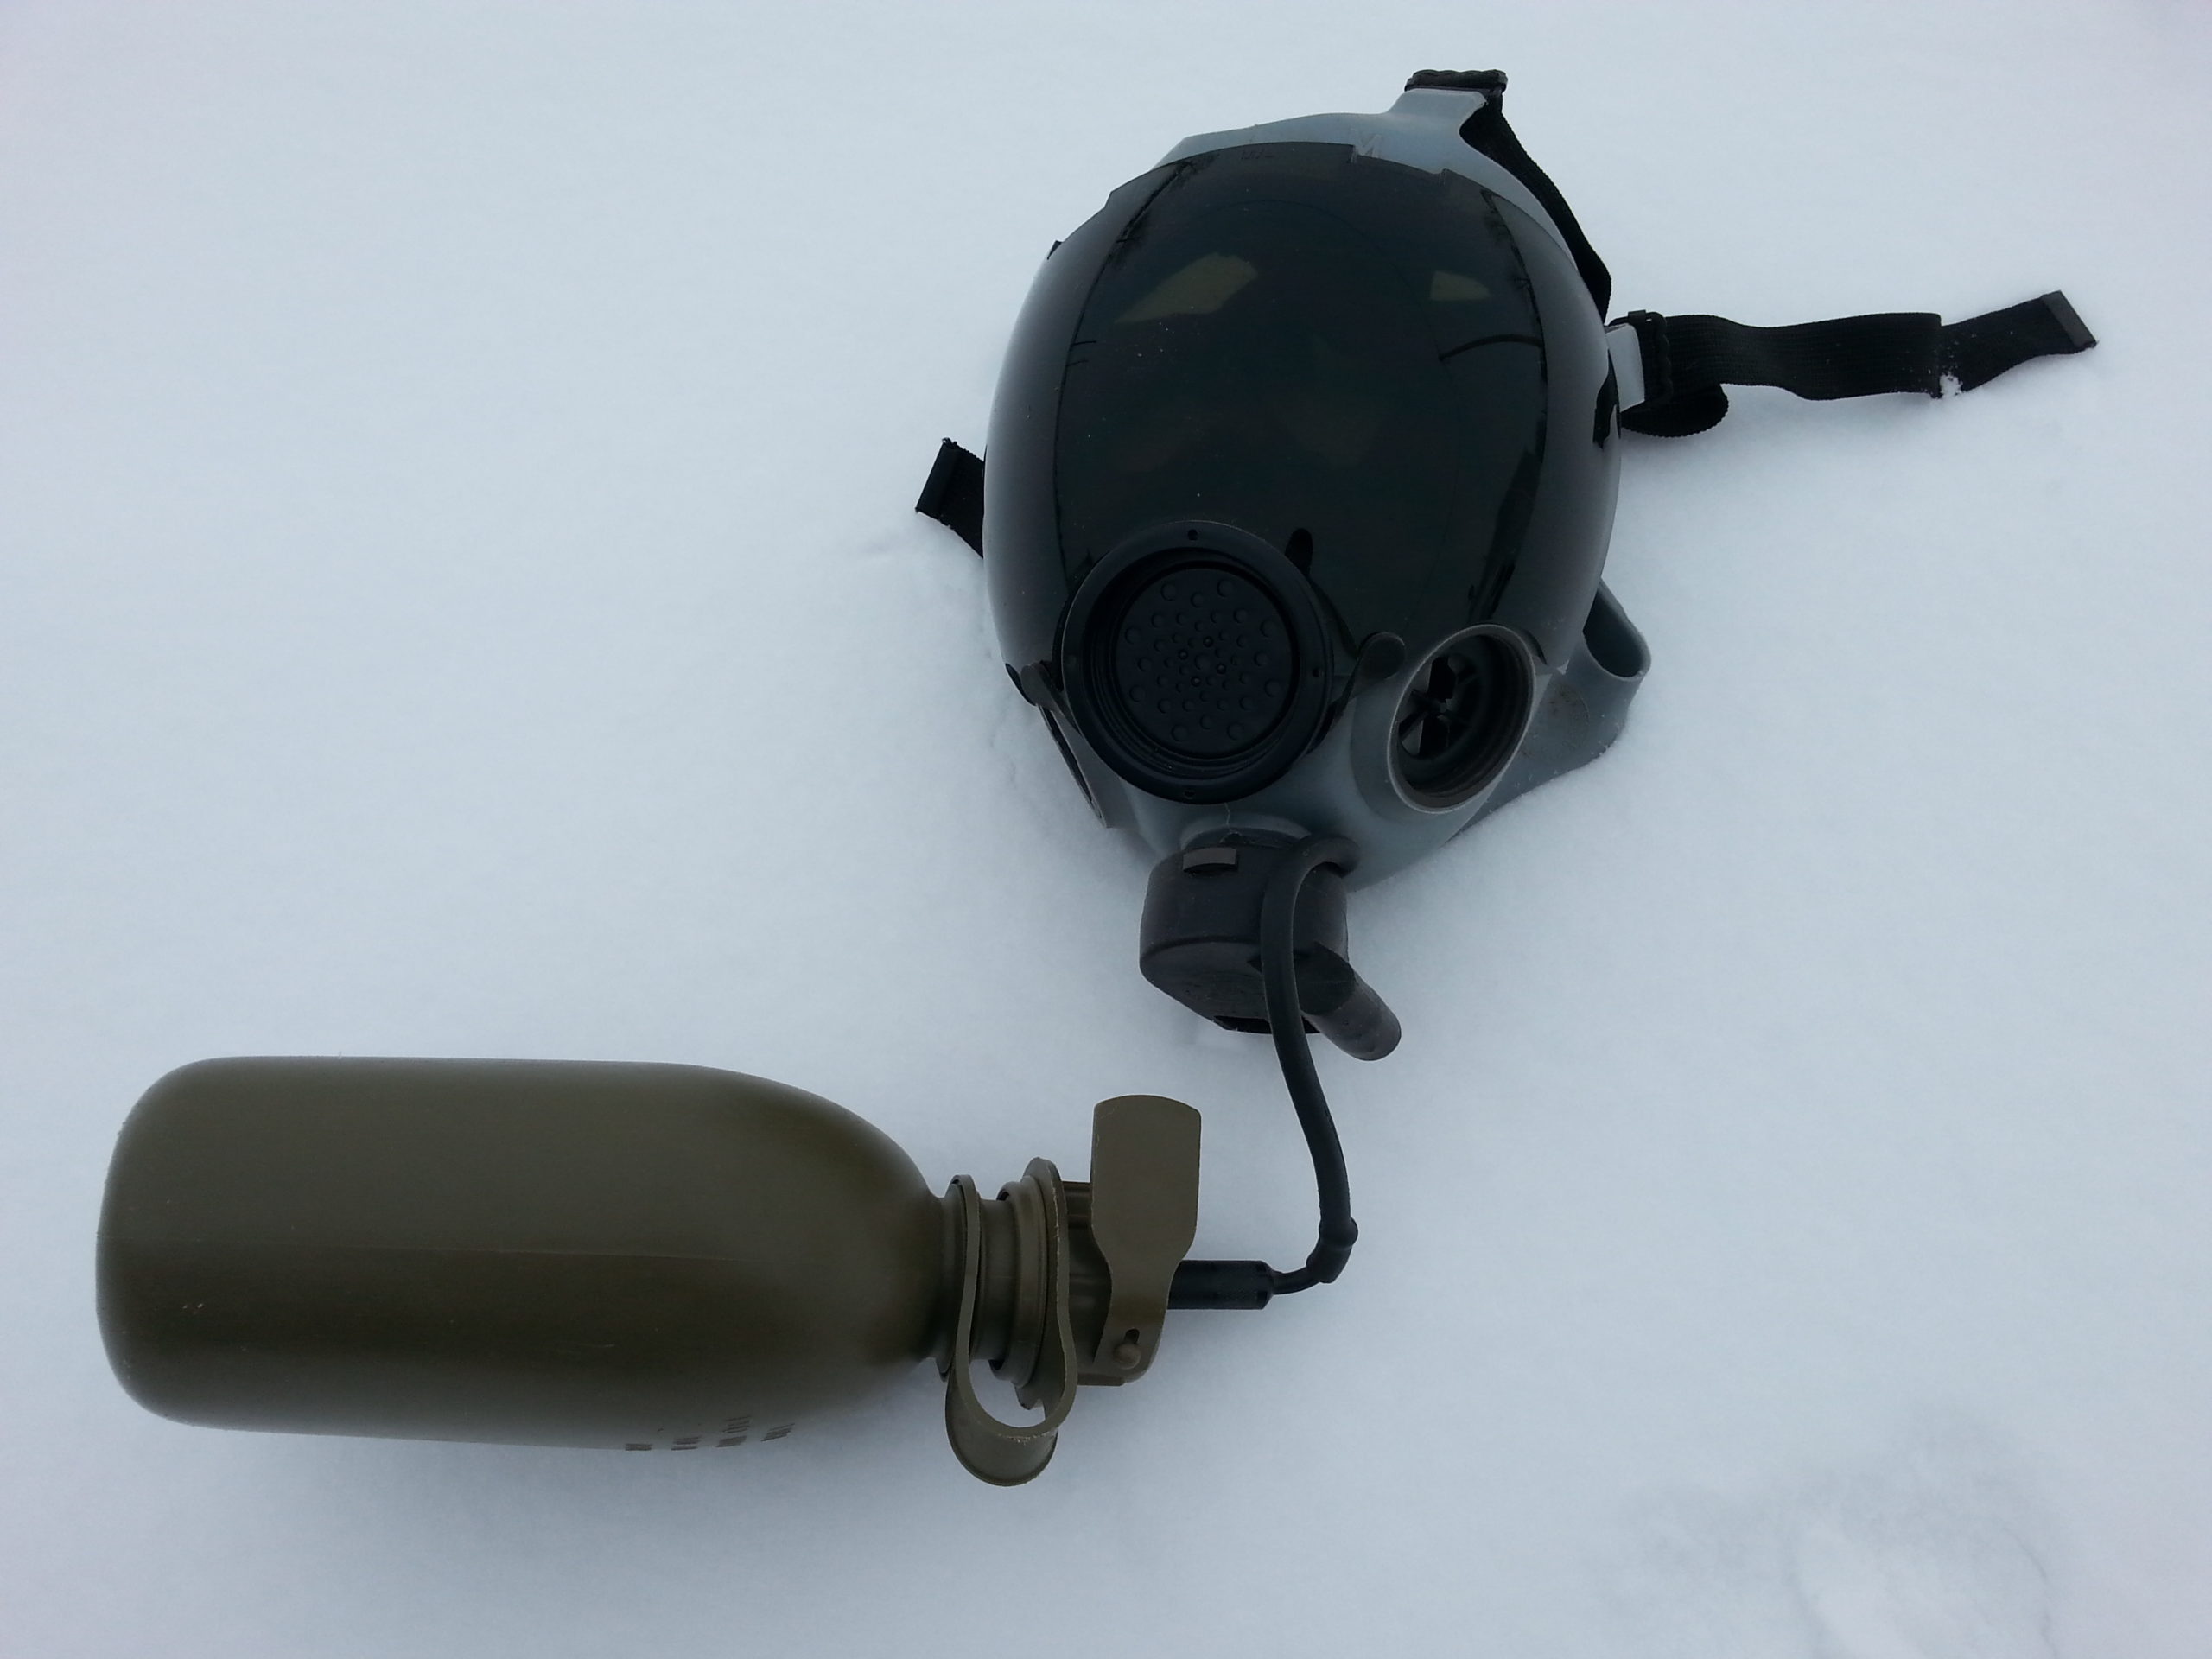 Canteen cap for US gas mask hydration system